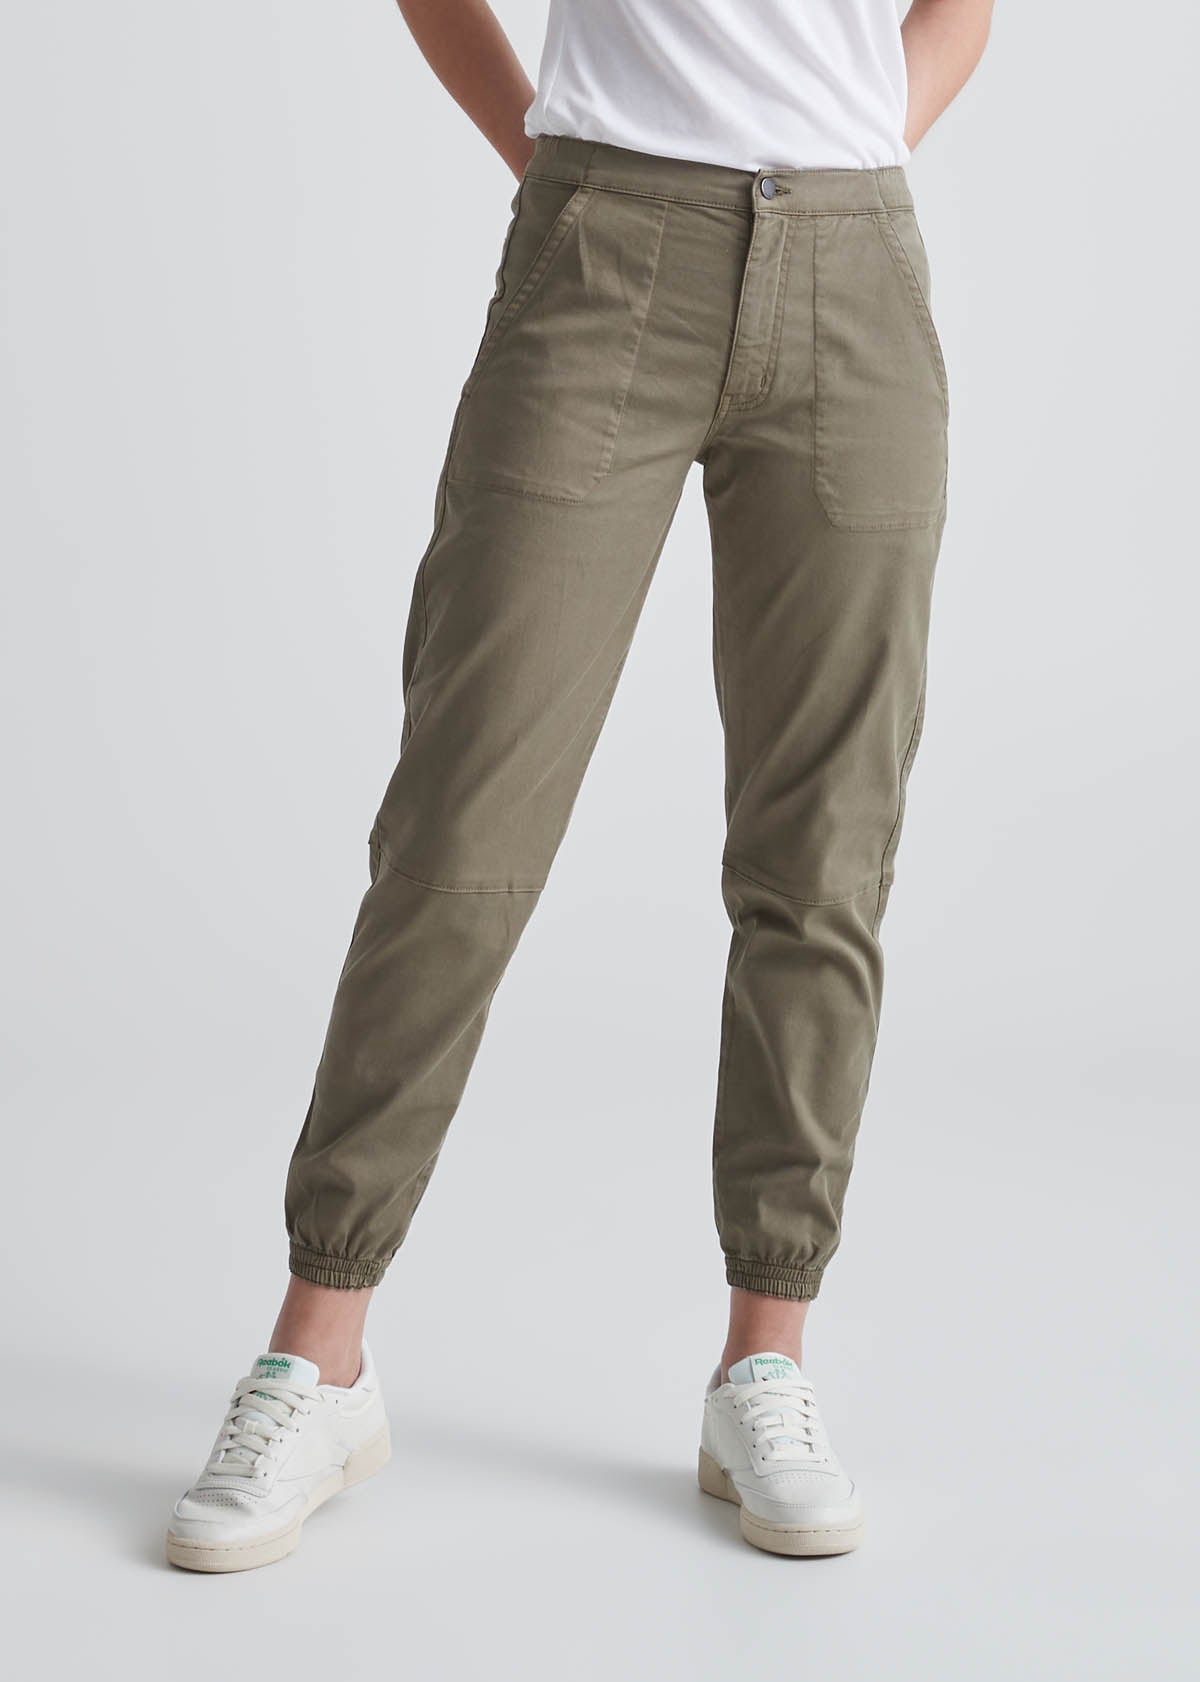 Women's High Rise Green Athletic Jogger Front